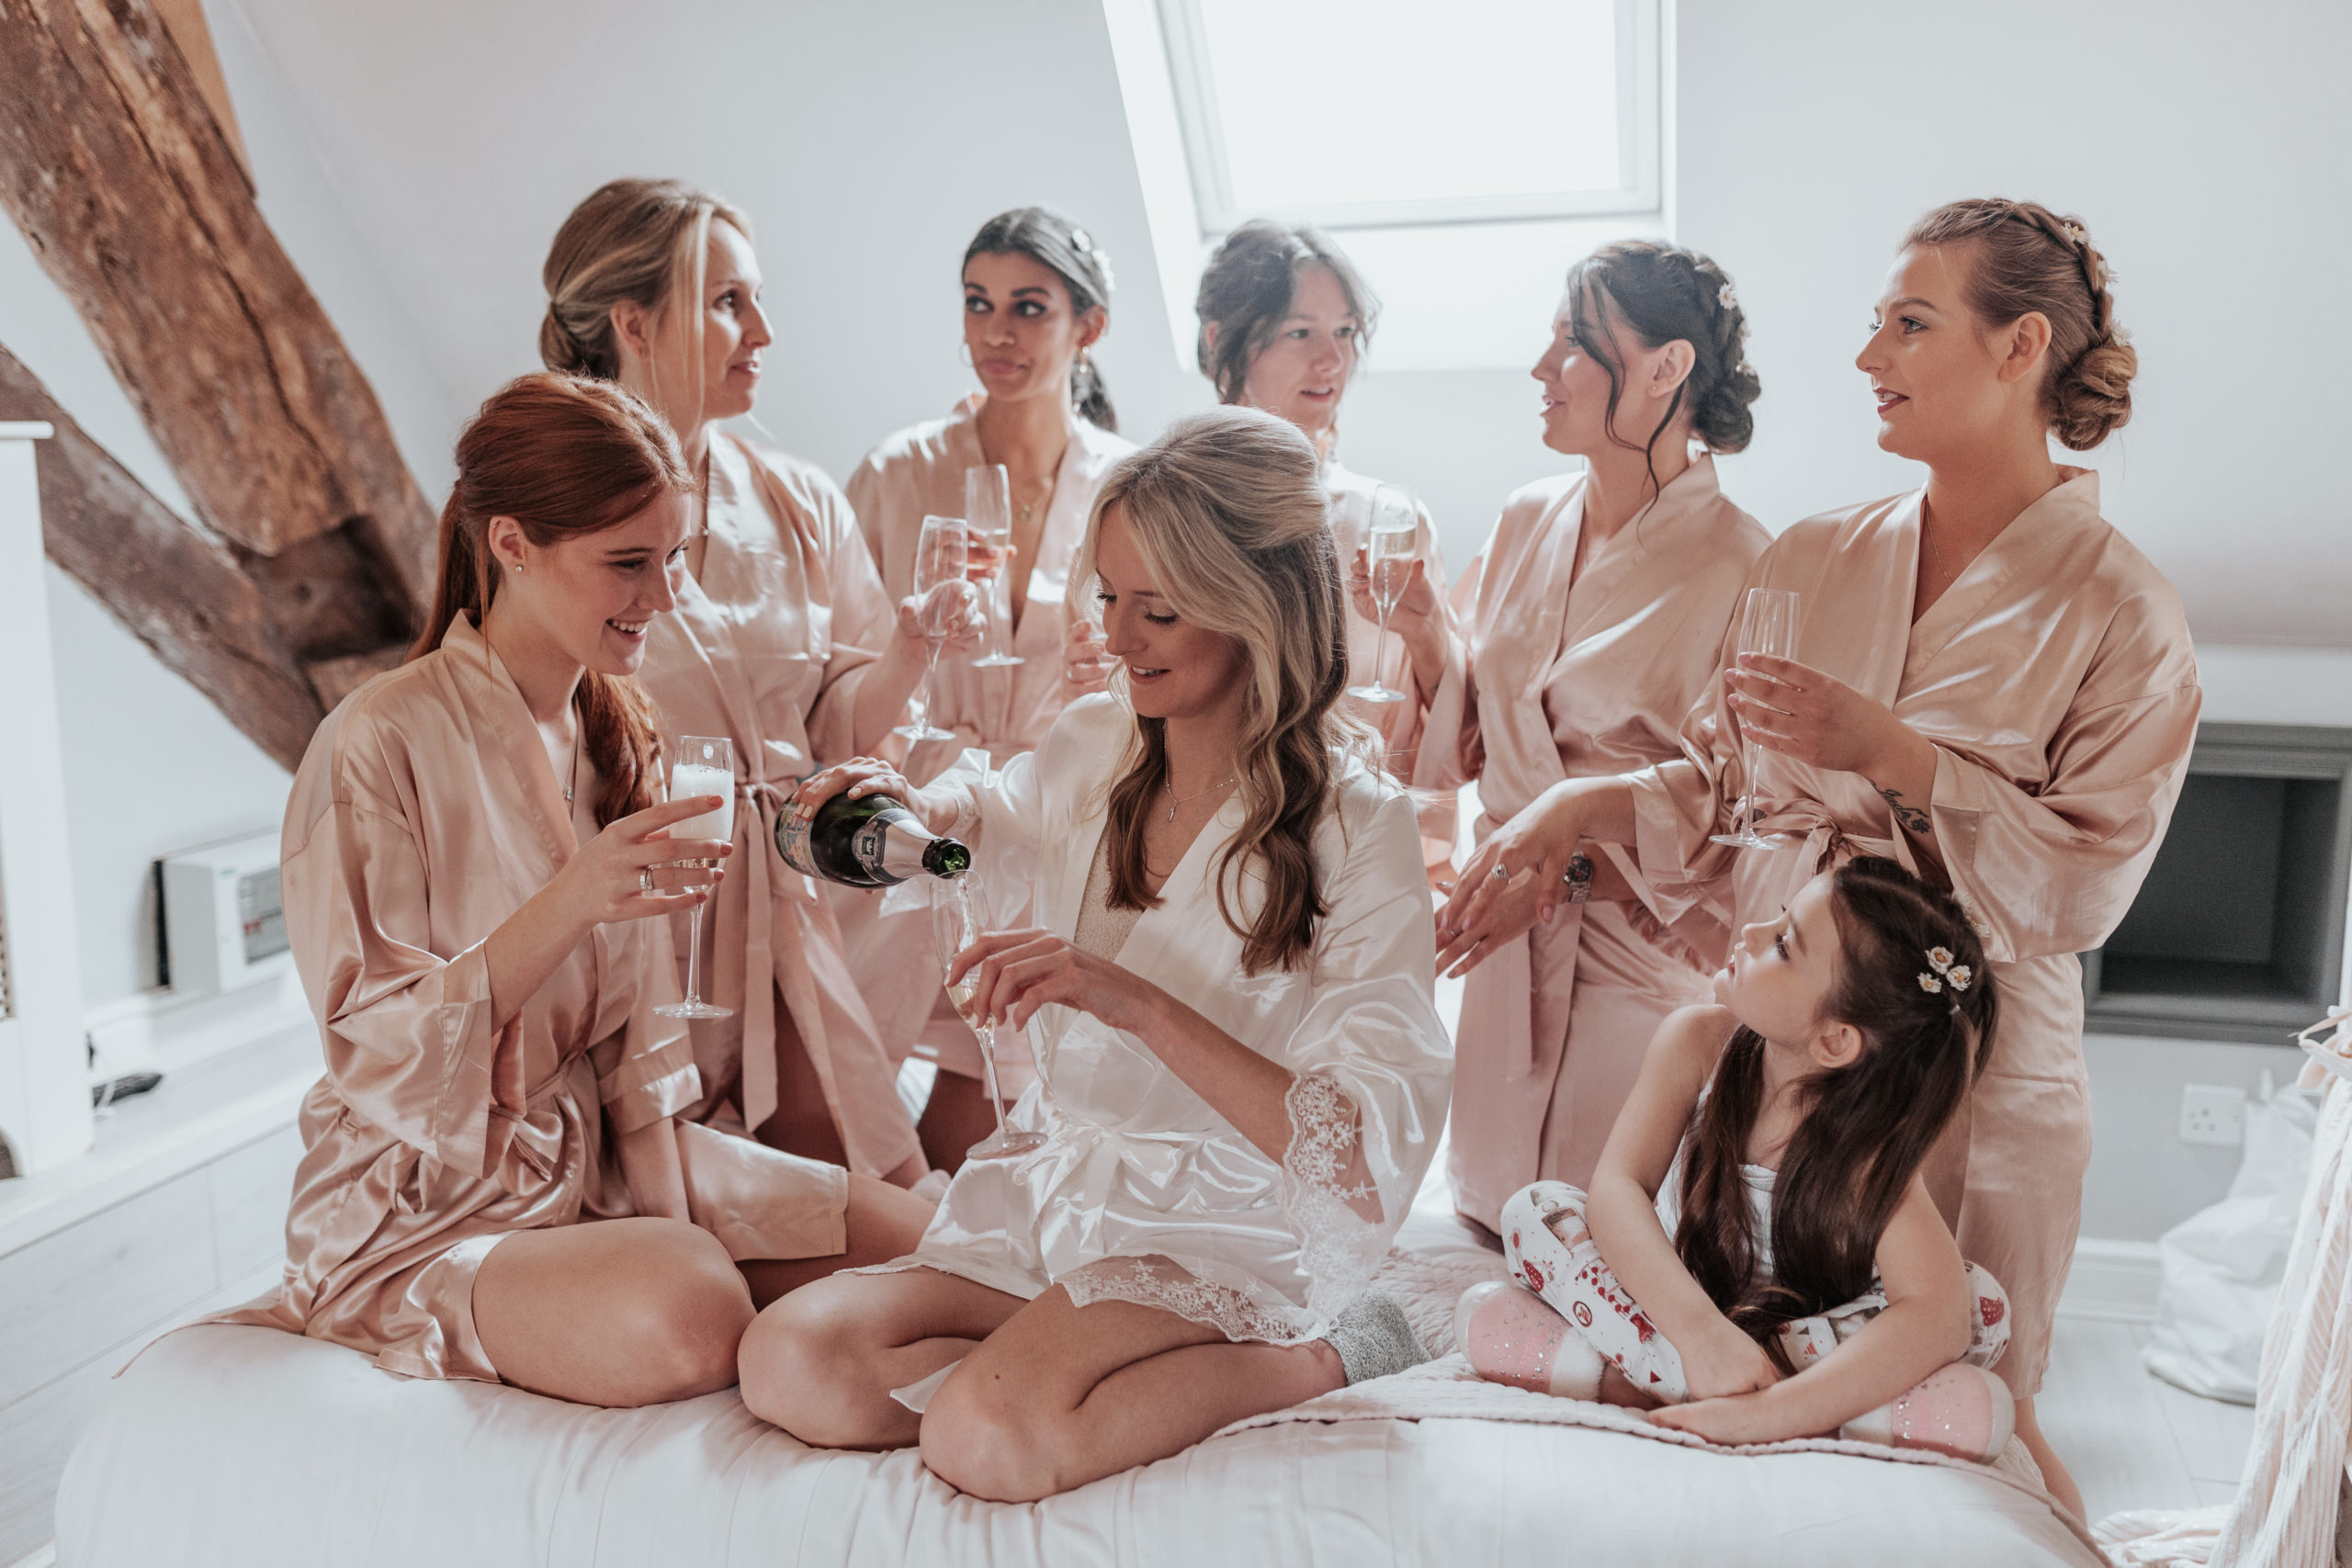 Sinead and her bridesmaids getting ready while drinking champagne in matching pyjamas